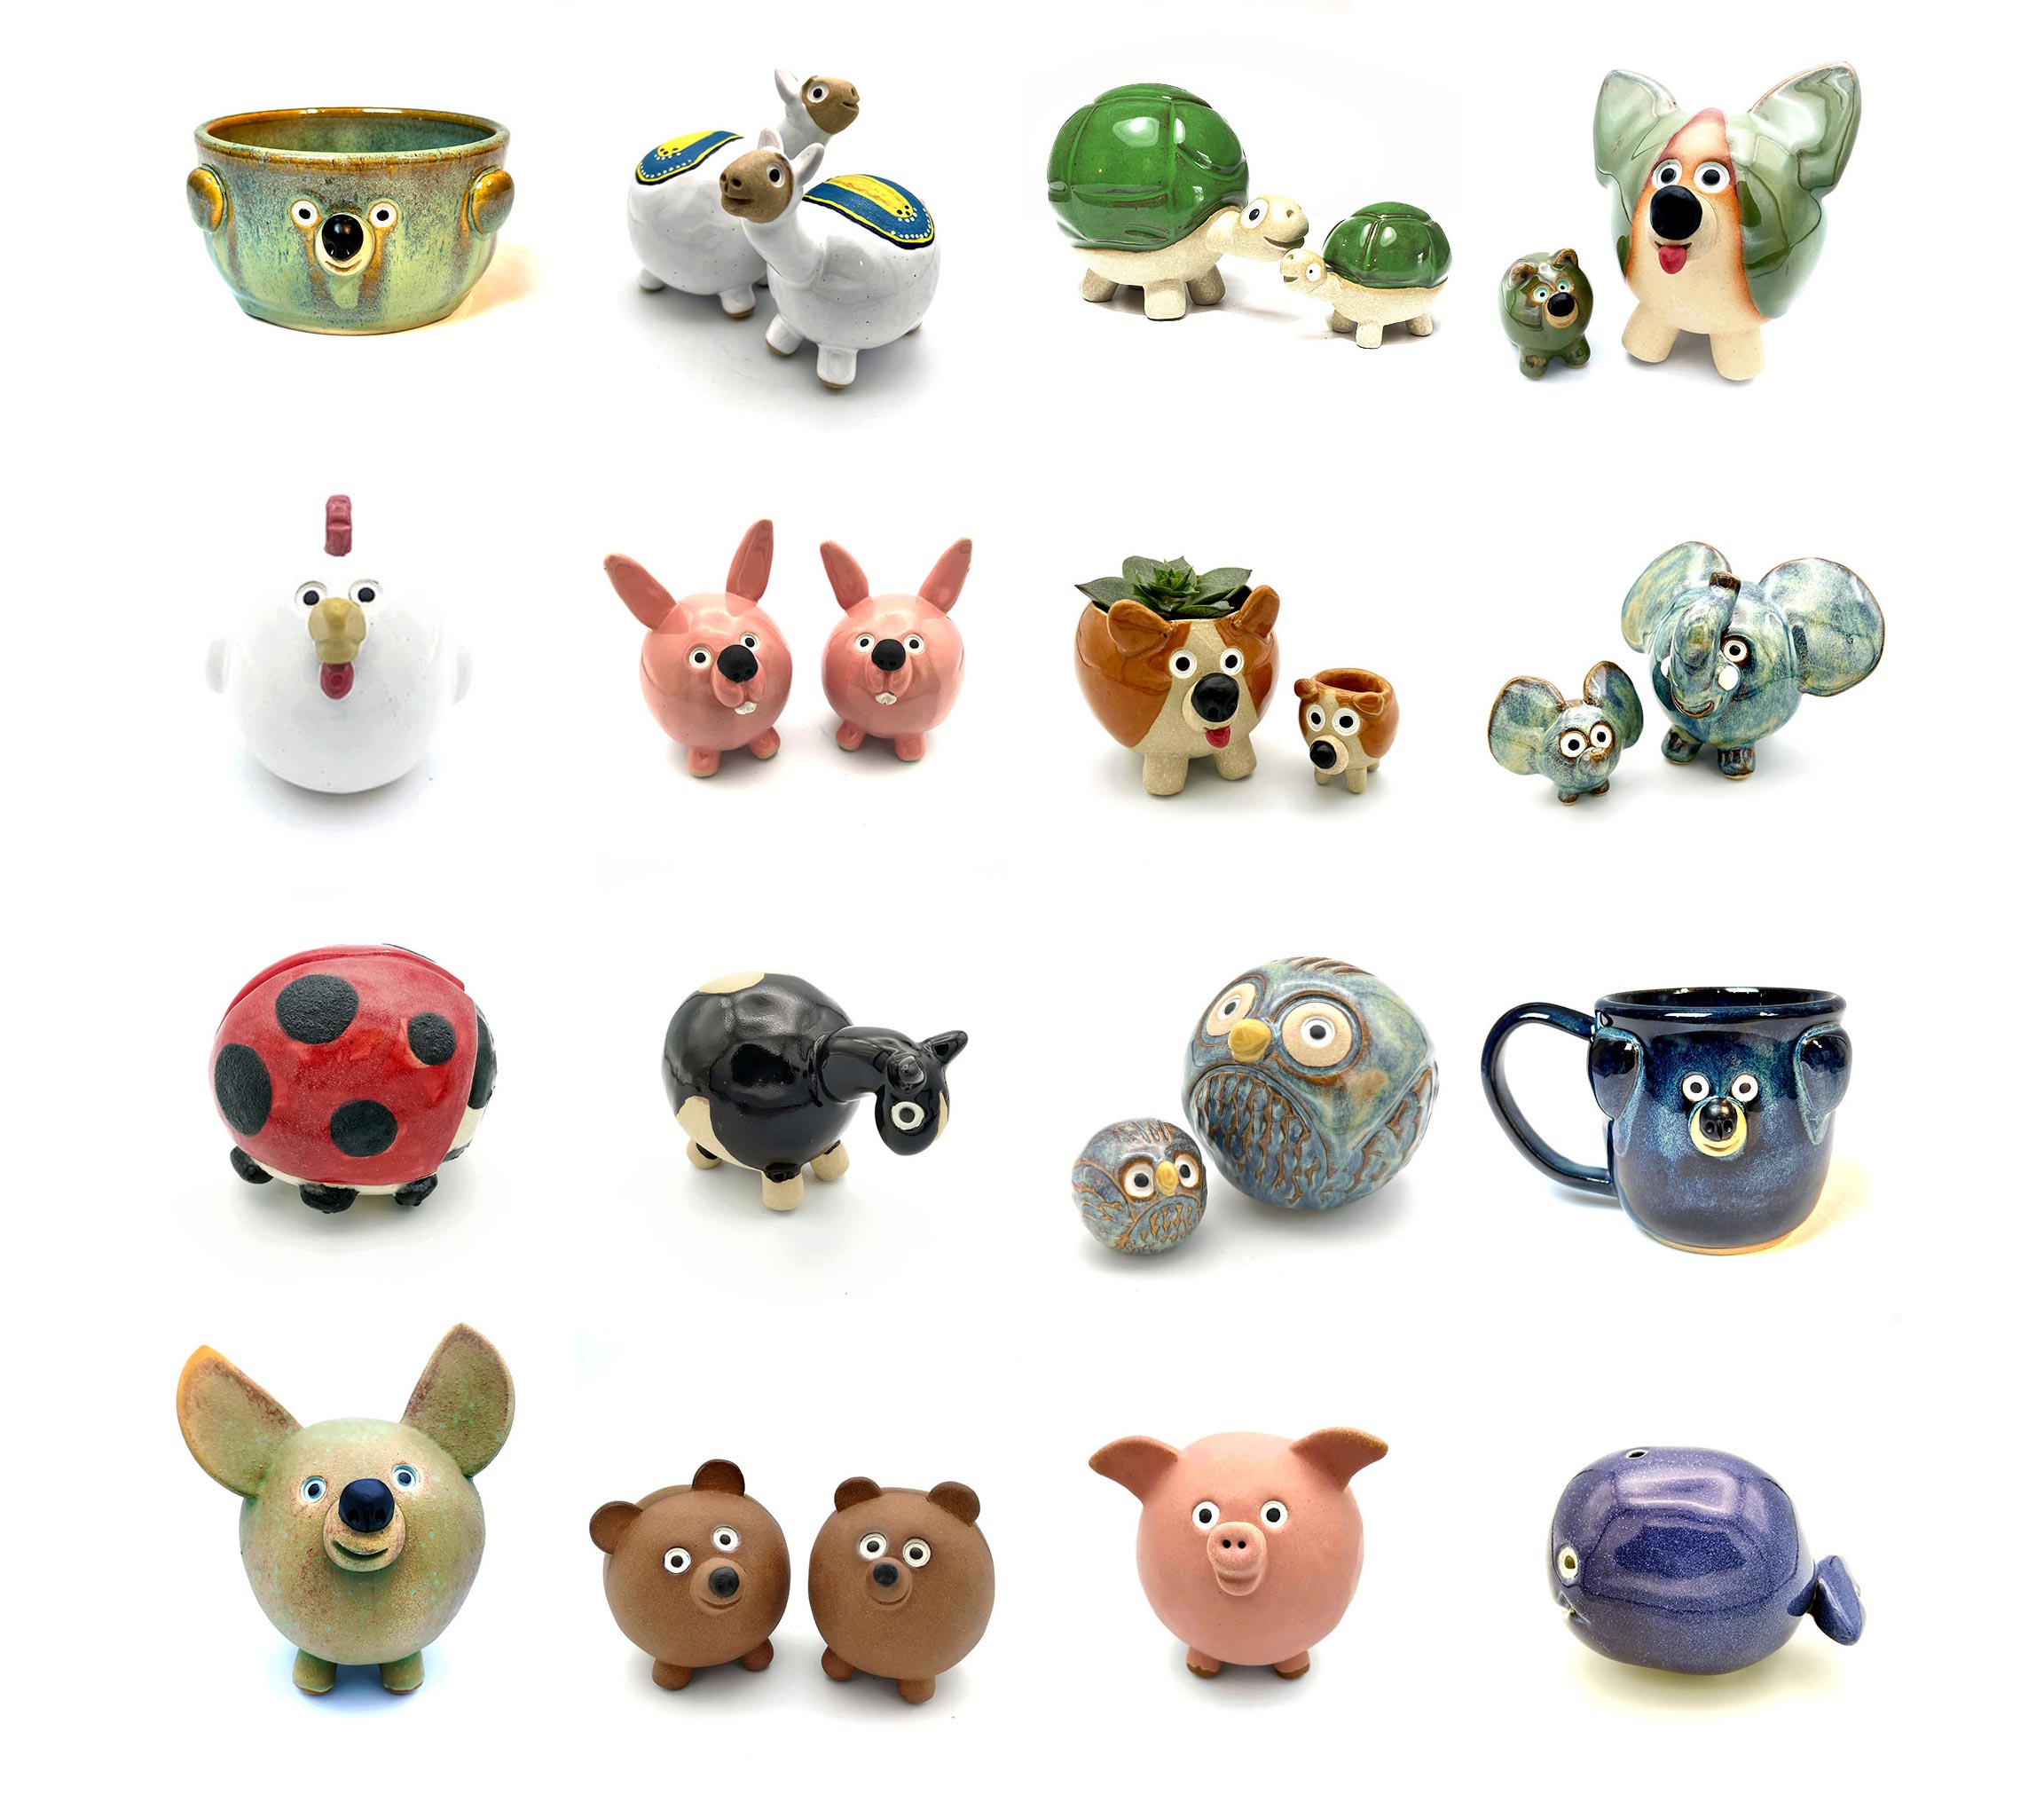 Rock Dogs Products Image of Bowls Mugs Animals and Planters